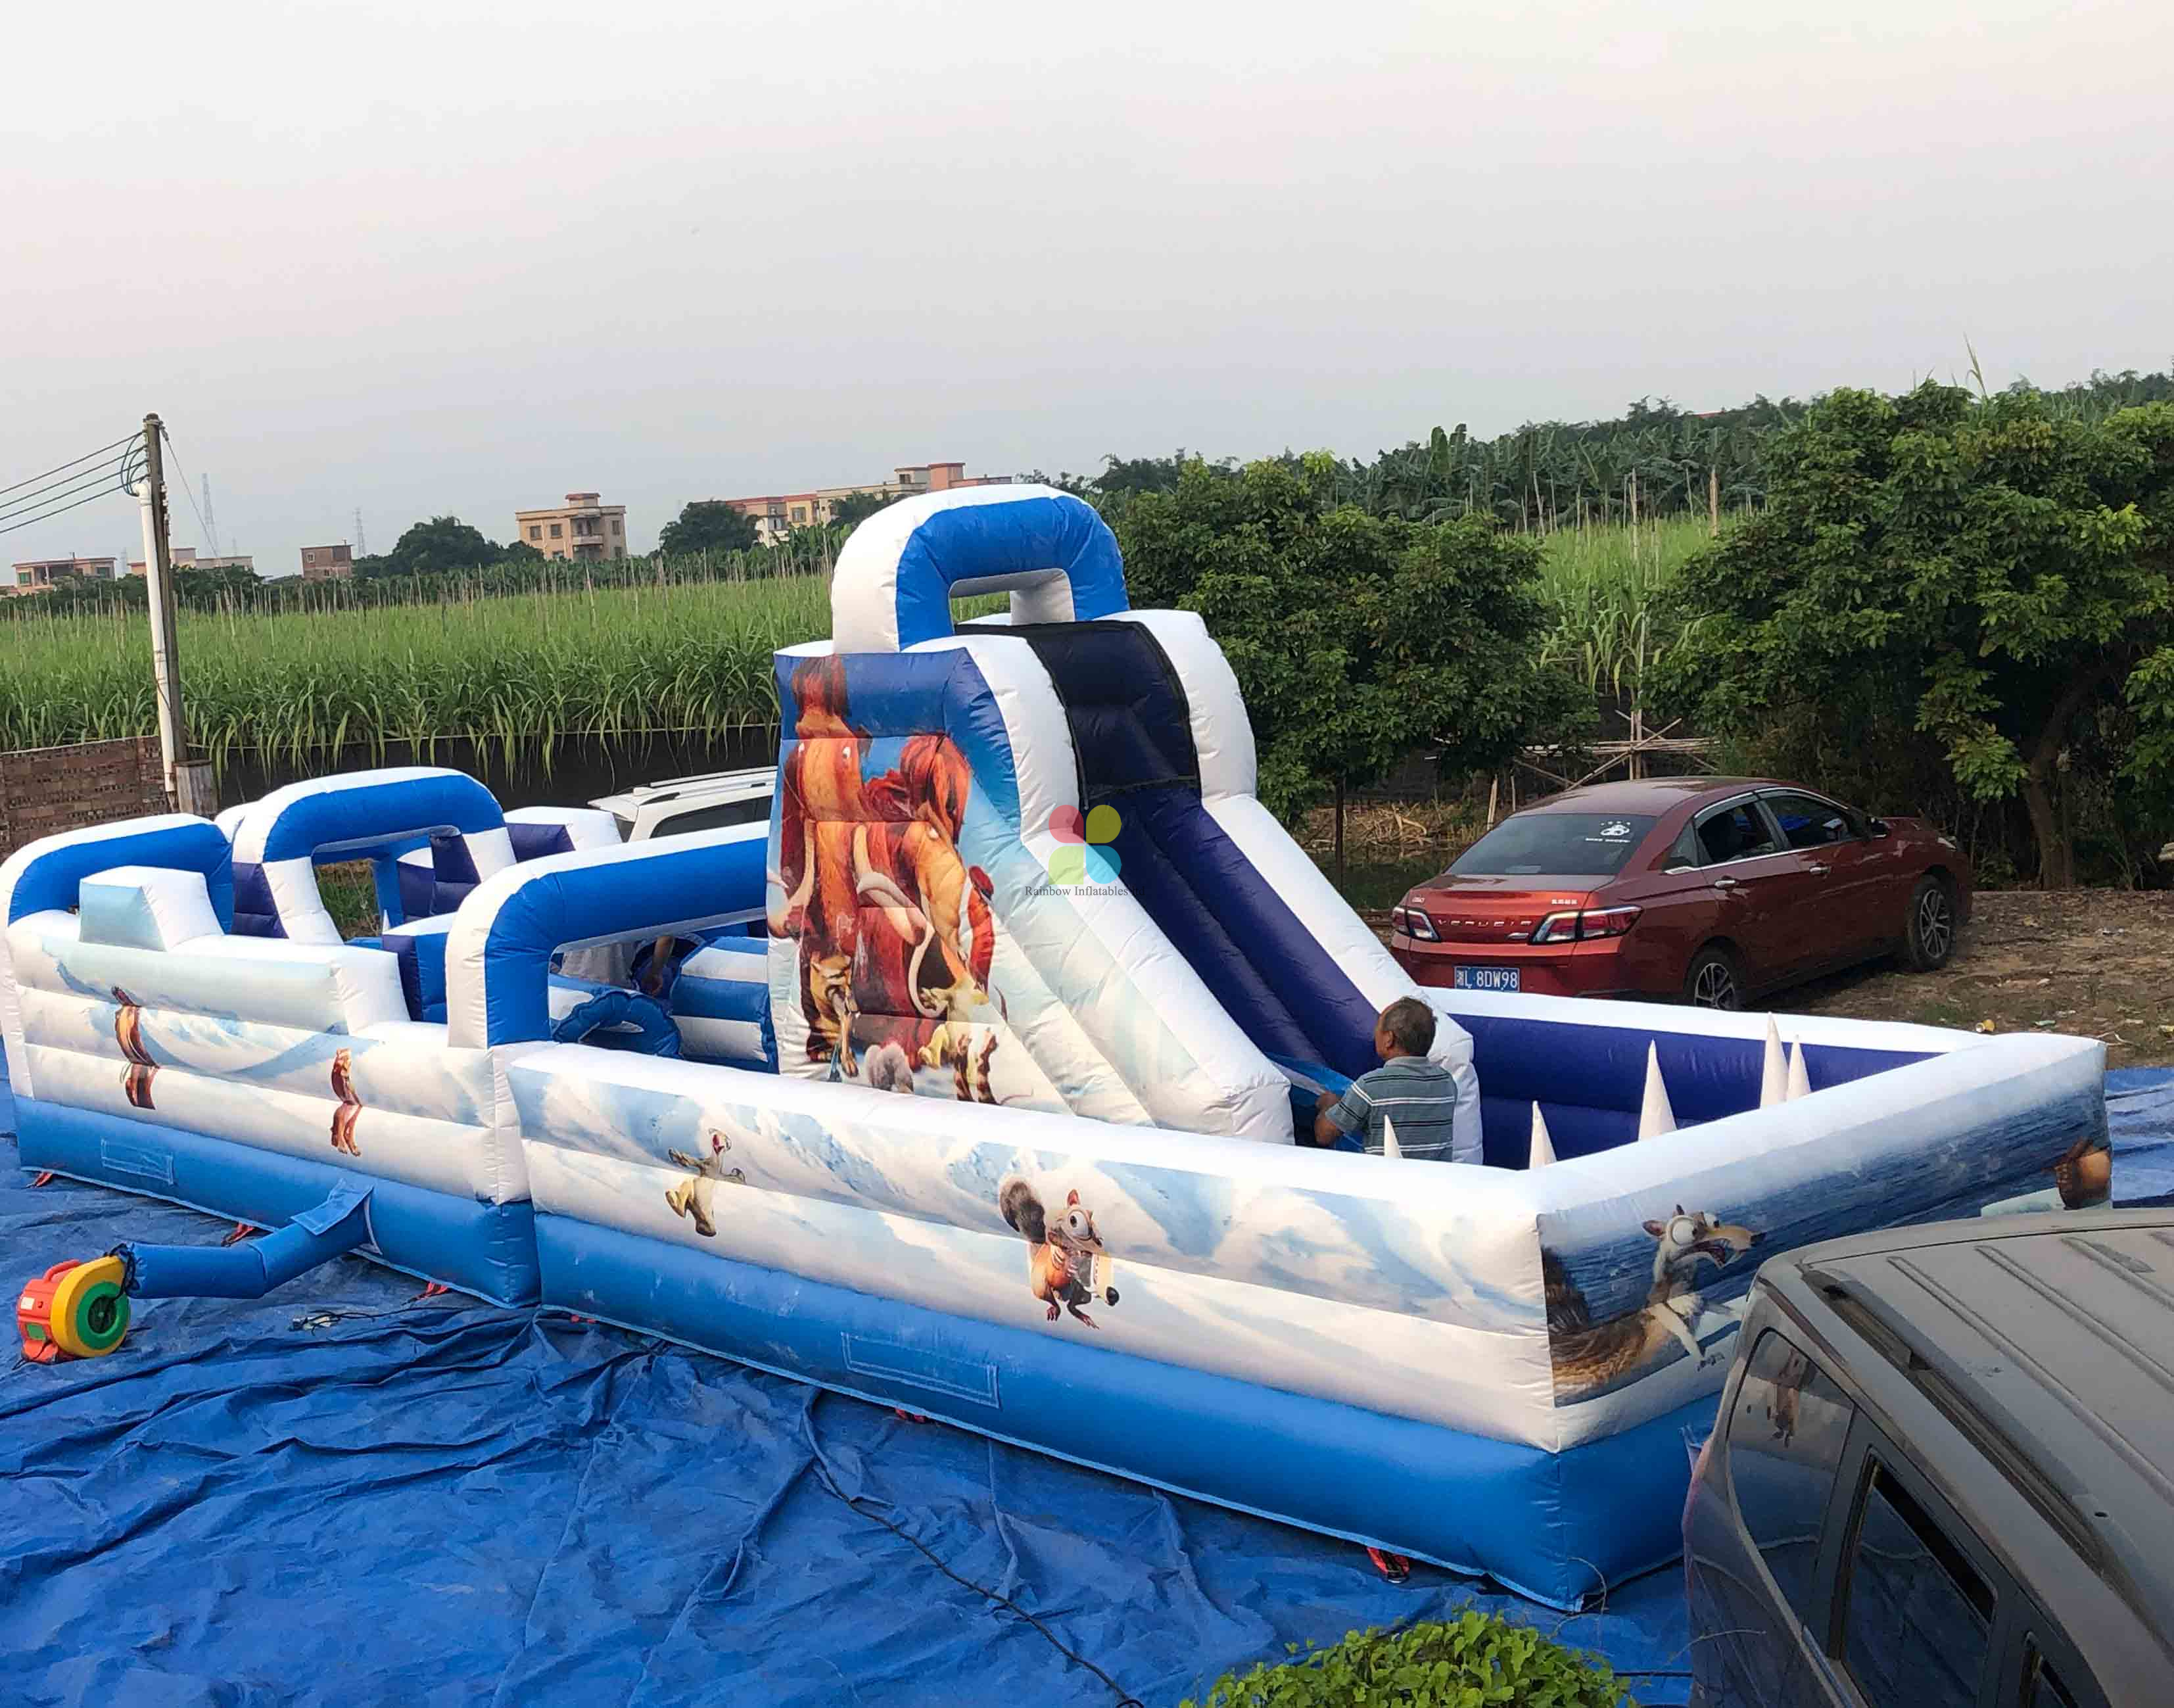 Inflatable ICE AGE Theme Obstacle for Kids